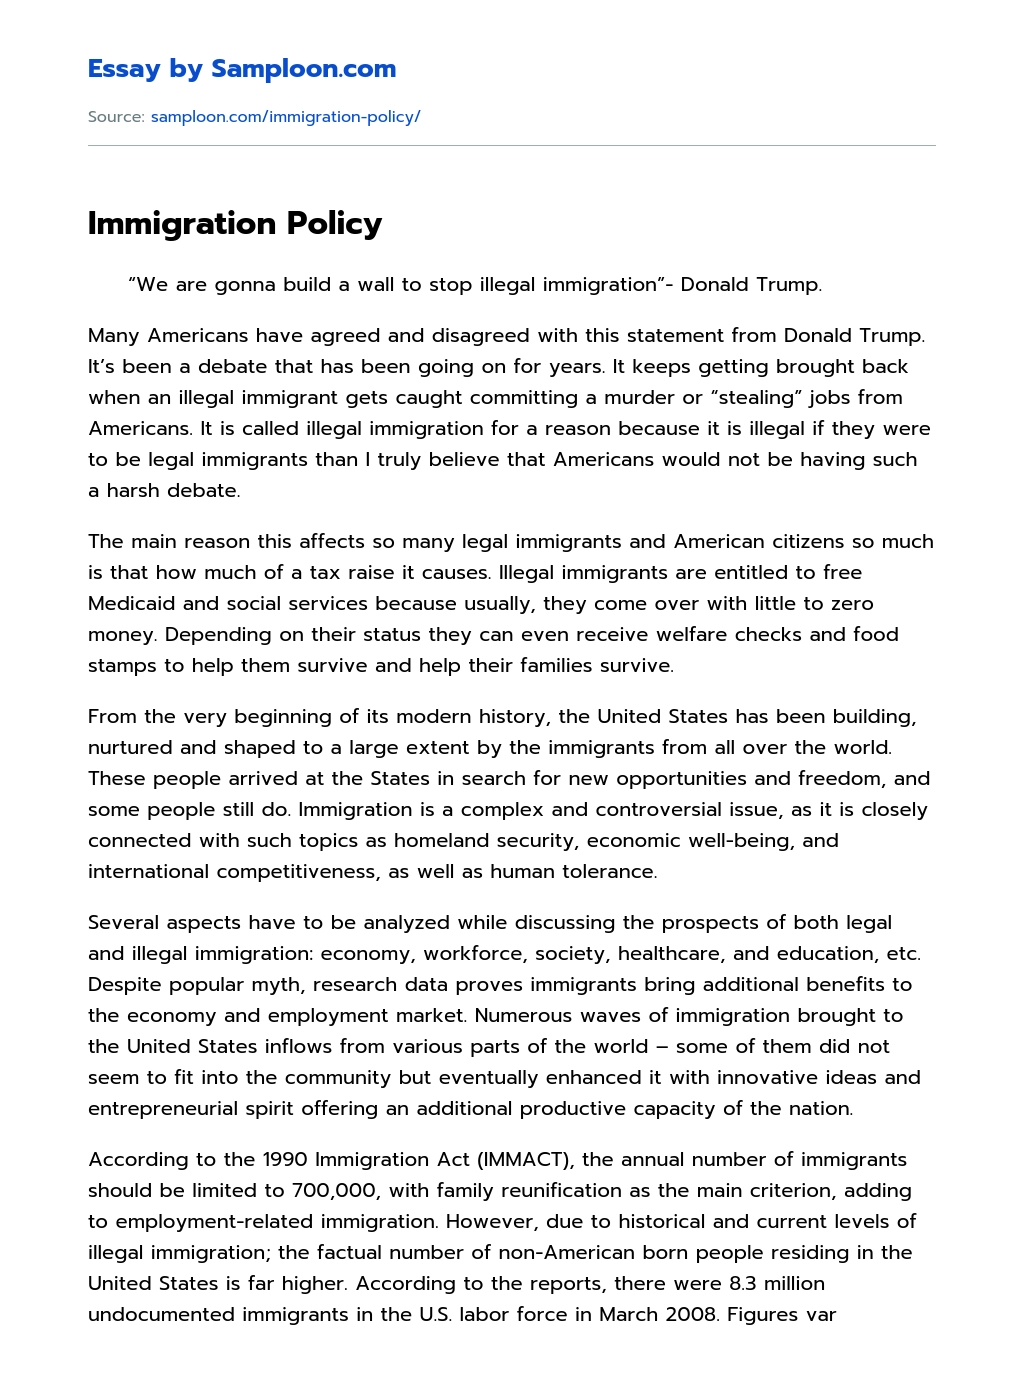 Immigration Policy essay